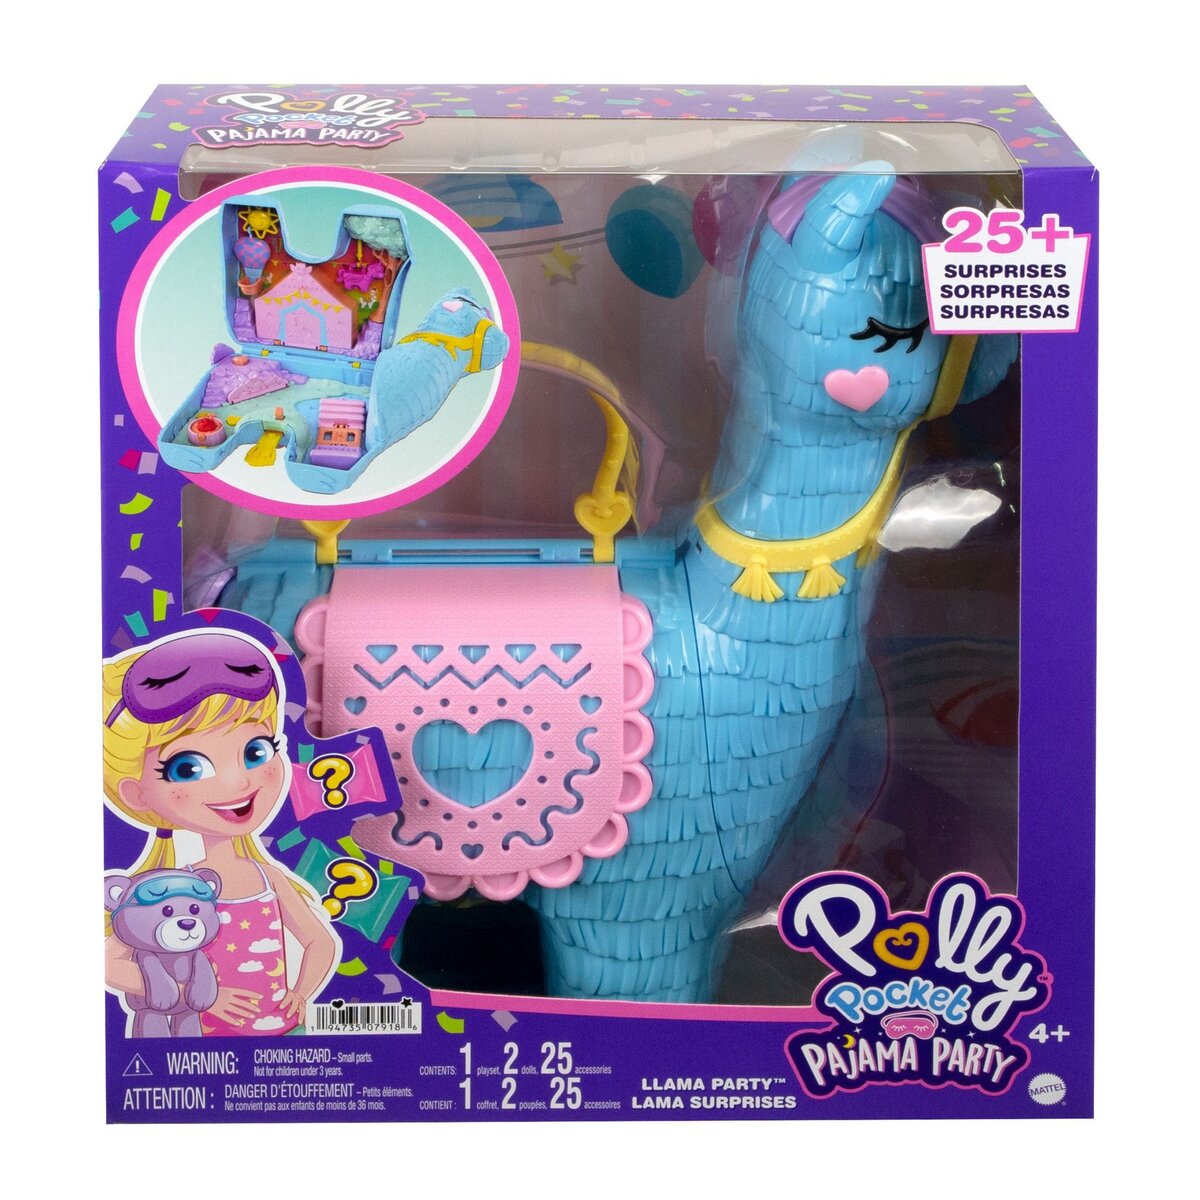 Valise surprise POLLY POCKET